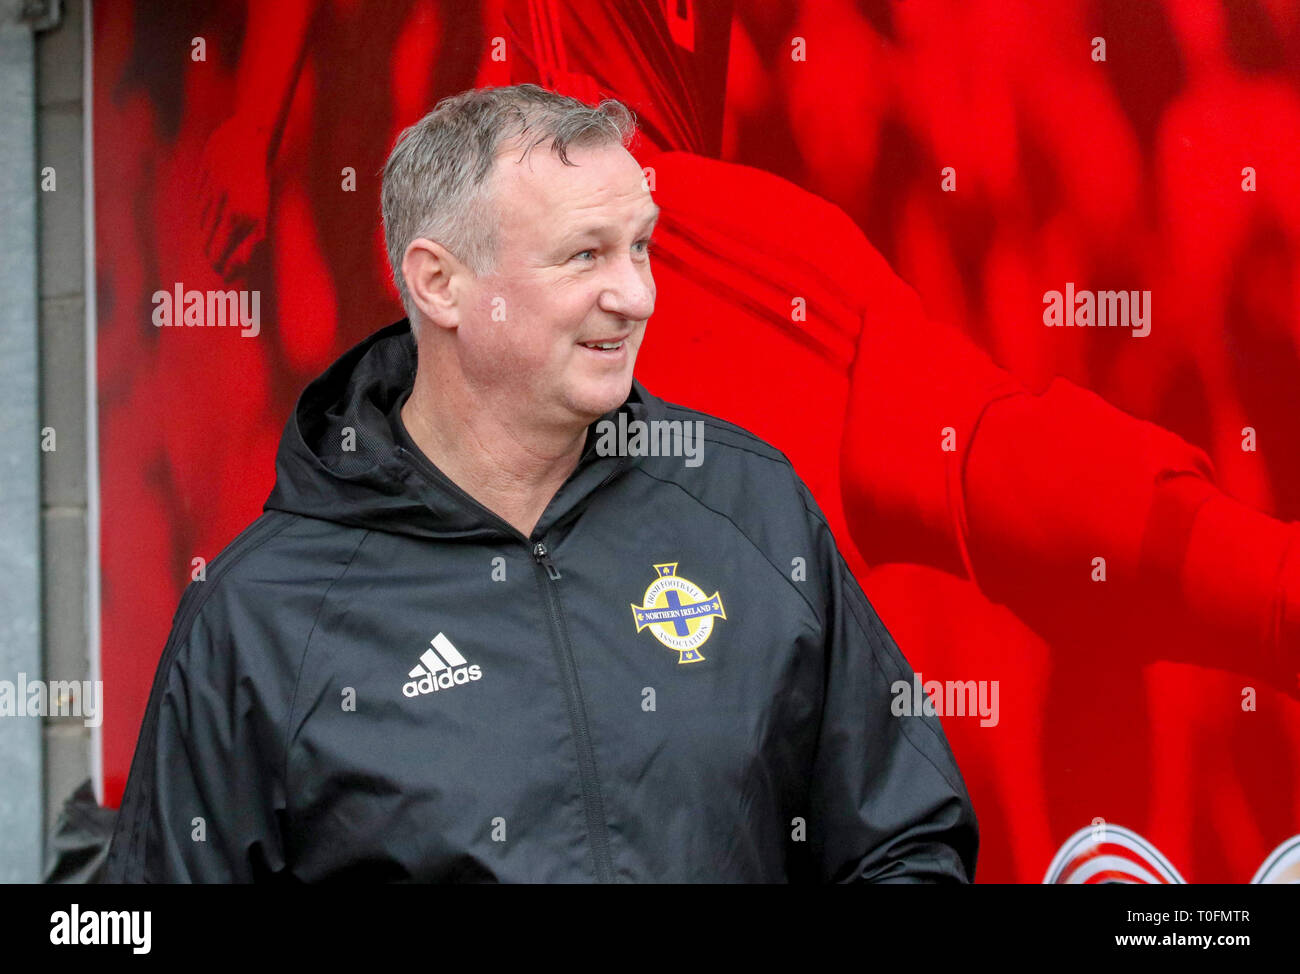 Windsor Park, Belfast, Northern Ireland.20 March 2019.Northern Ireland training in Belfast this morning ahead of their UEFA EURO 2020 Qualifier against Estonia tomorrow night in the stadium. Northern Ireland manager Michael O'Oneill at this morning's session.  Credit: David Hunter/Alamy Live News. Stock Photo